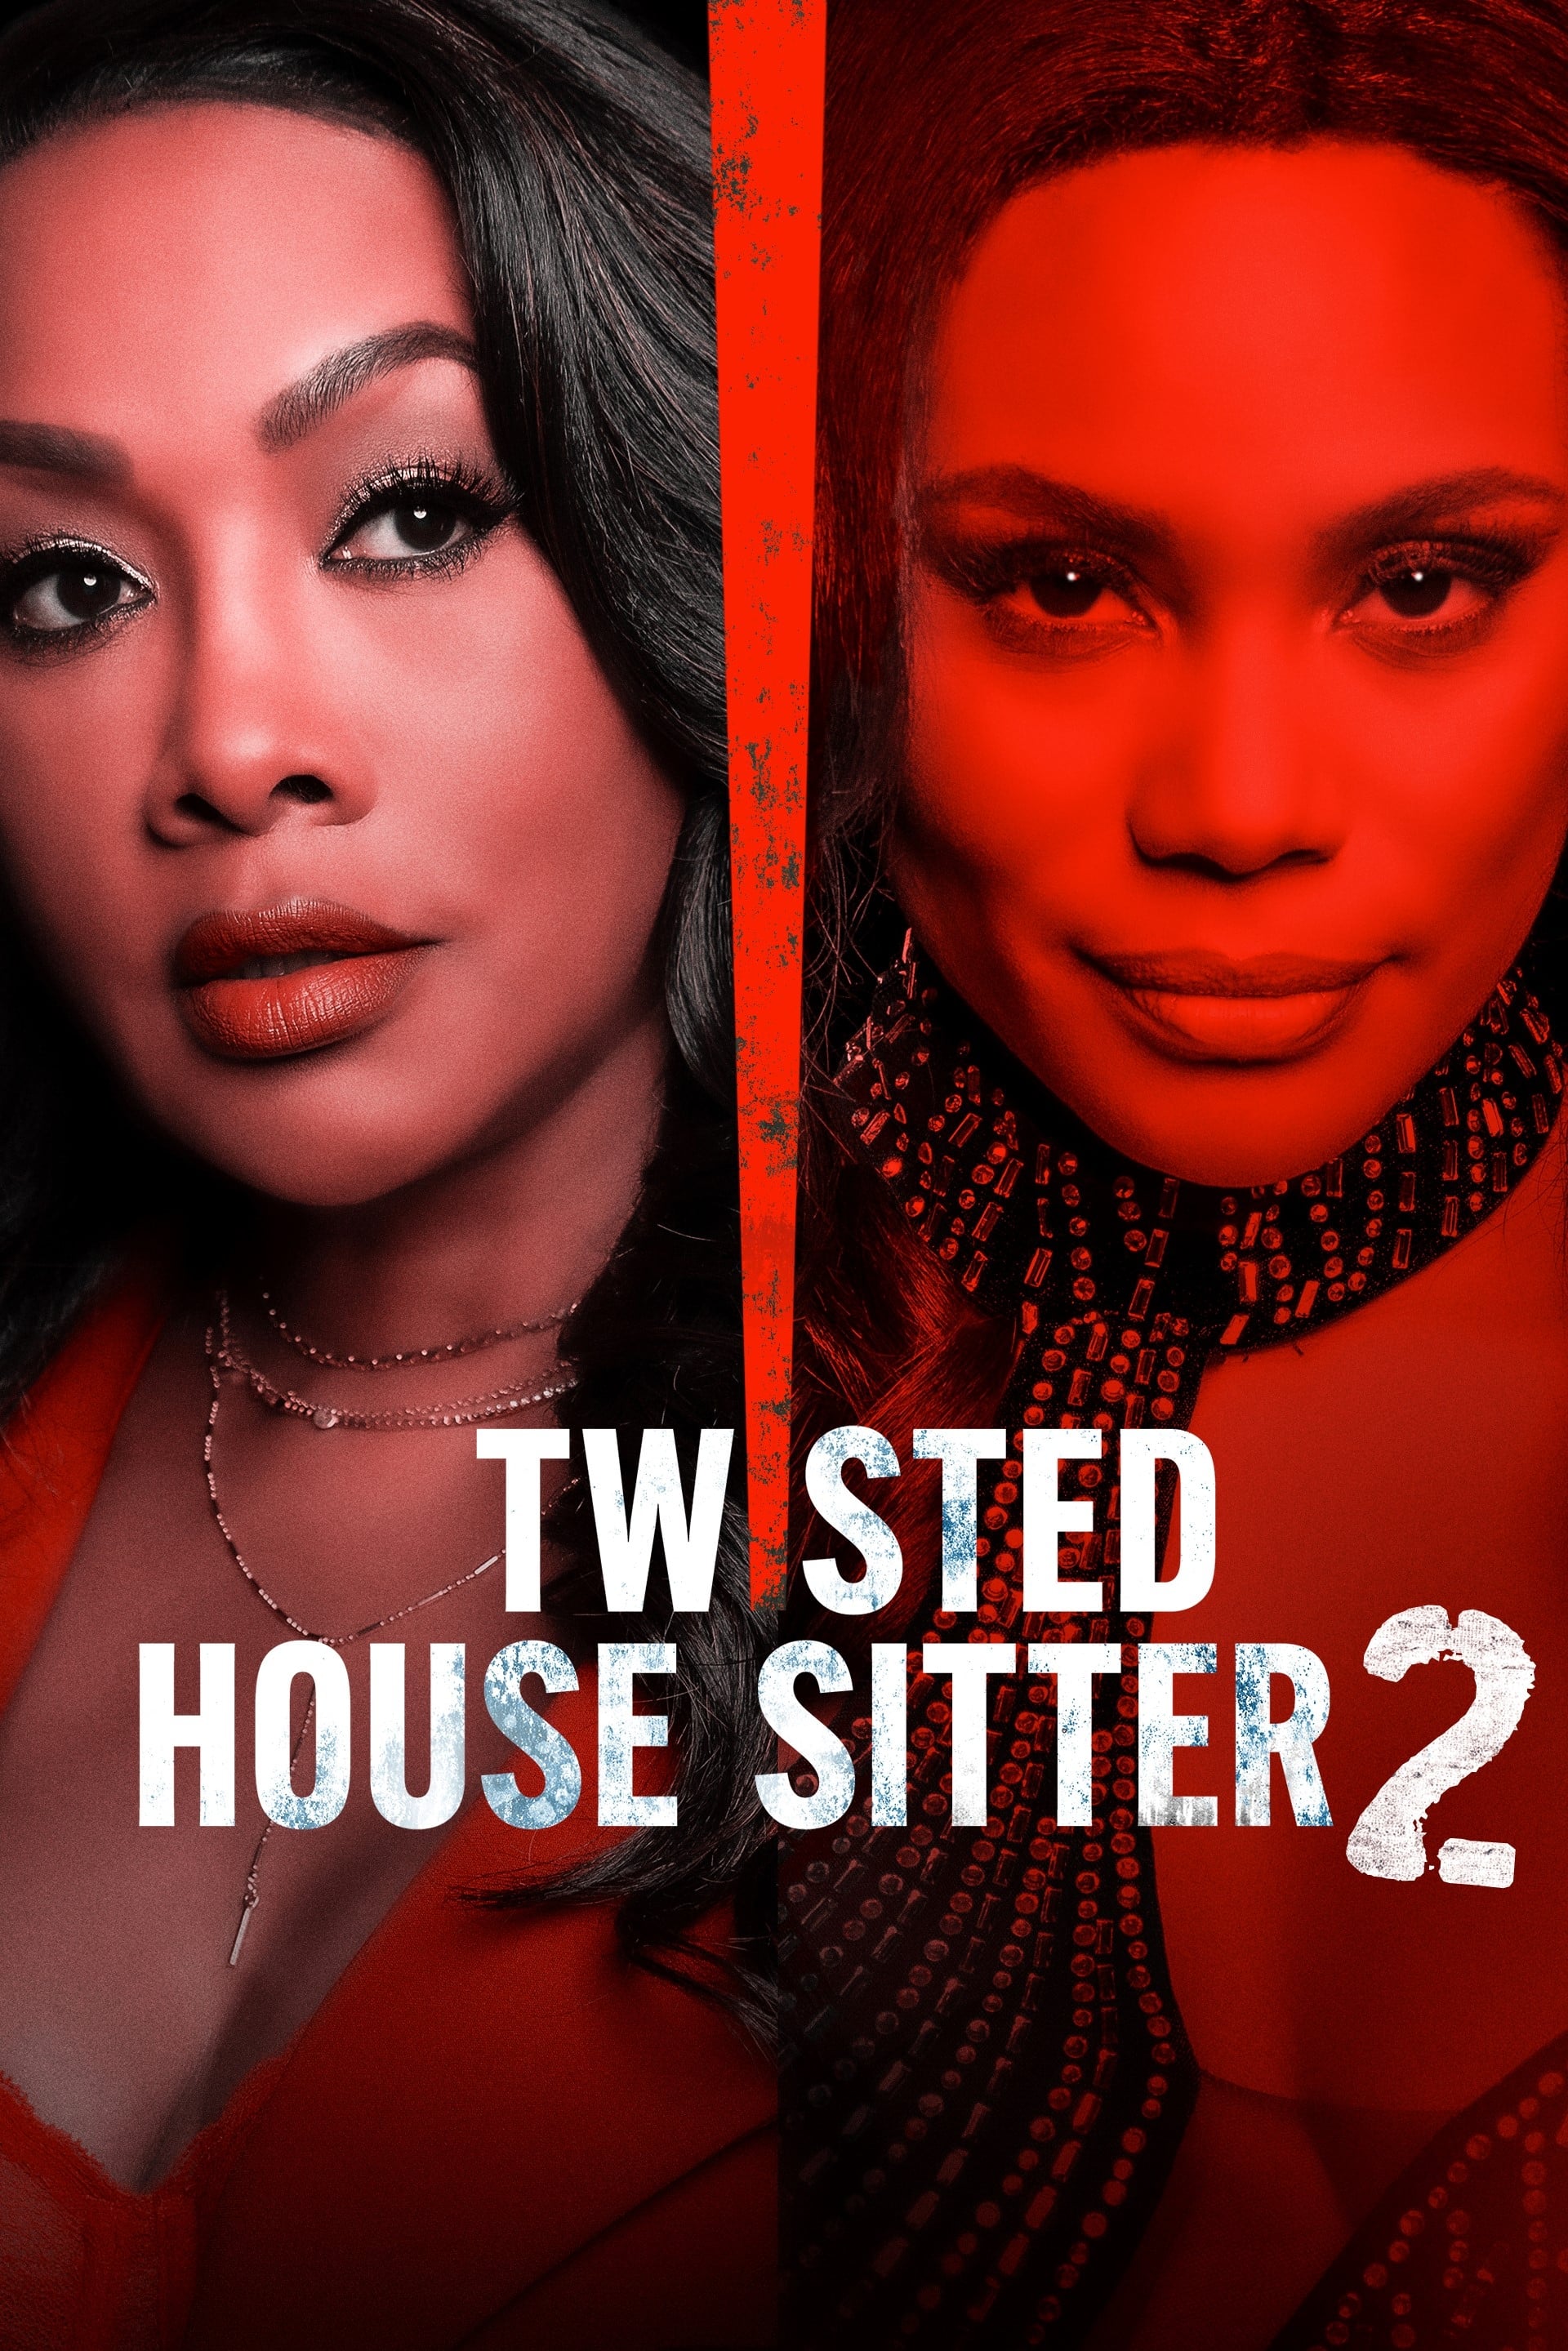 Twisted House Sitter 2 film